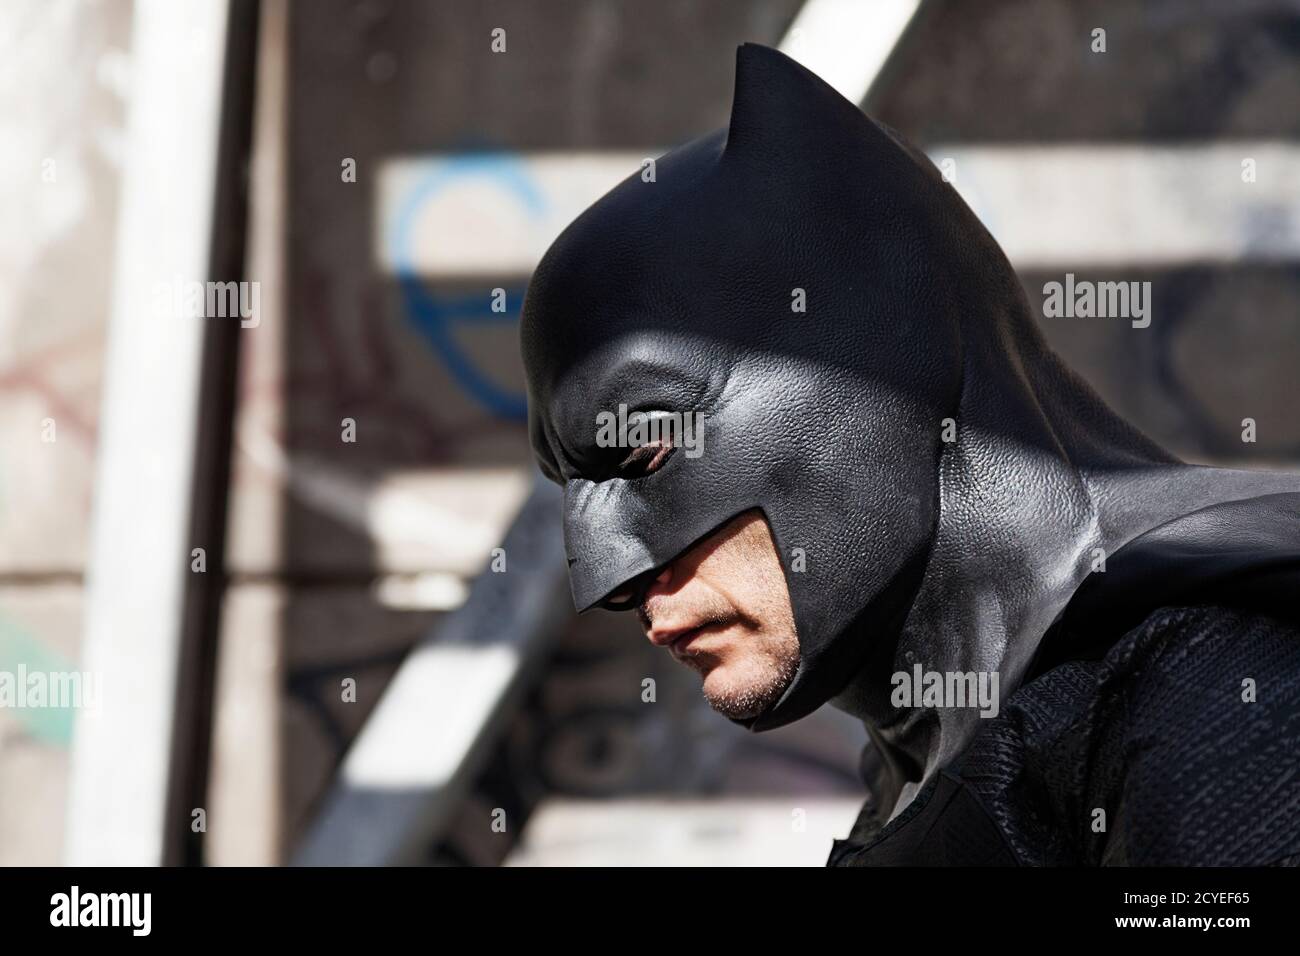 Umea, Norrland Sweden - September 5, 2020: Batman character squints with eyes in the strong sunlight Stock Photo